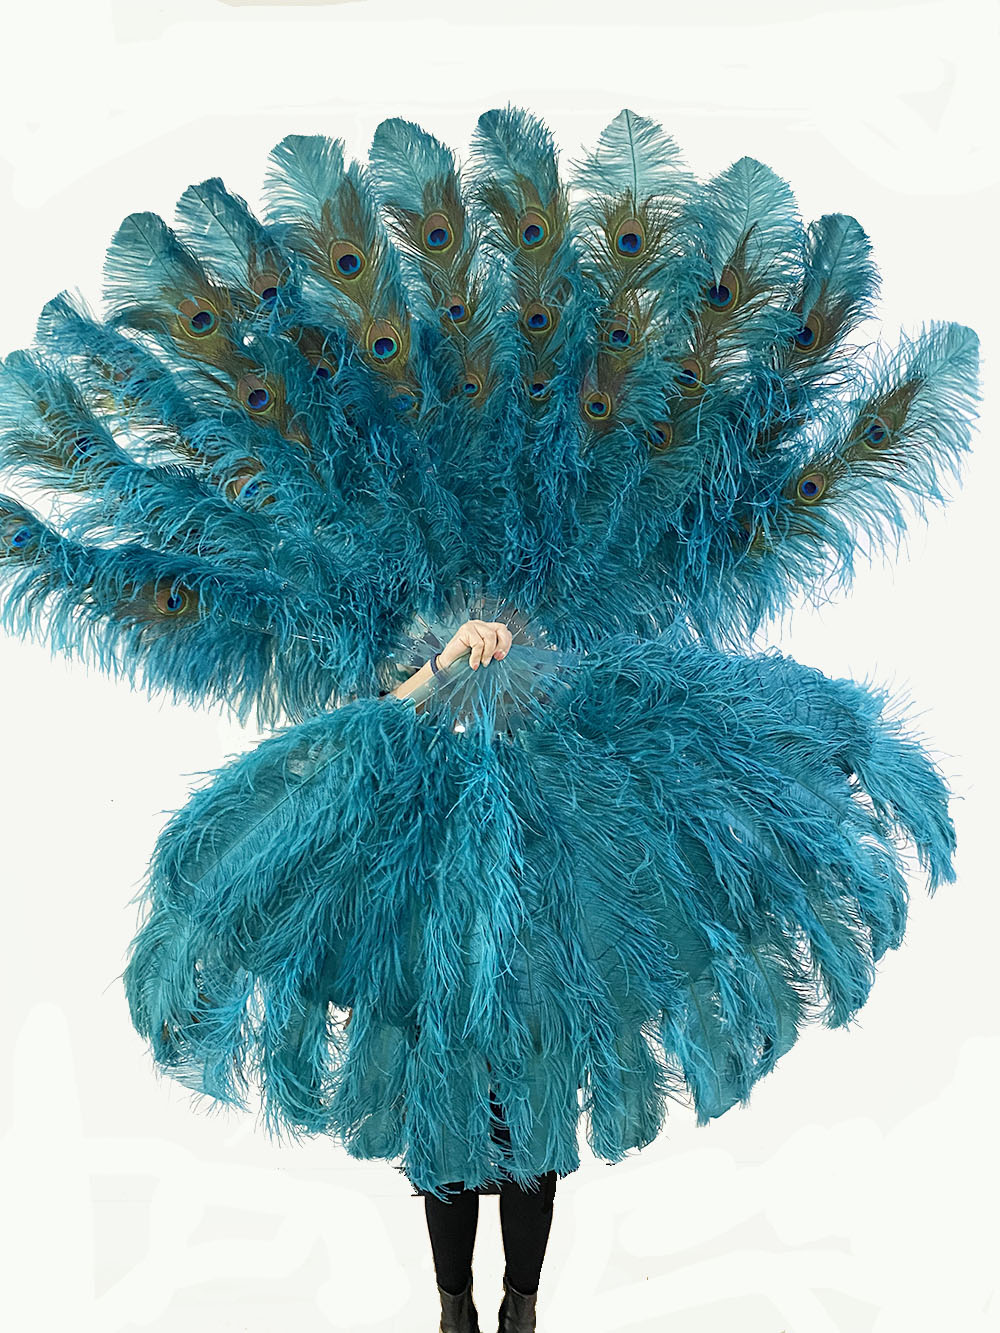 hotfans XL 2 Layers Sky Blue Ostrich Feather Fan 34''x 60'' with Travel Leather Bag Left Hand Fan / Transparent Staves